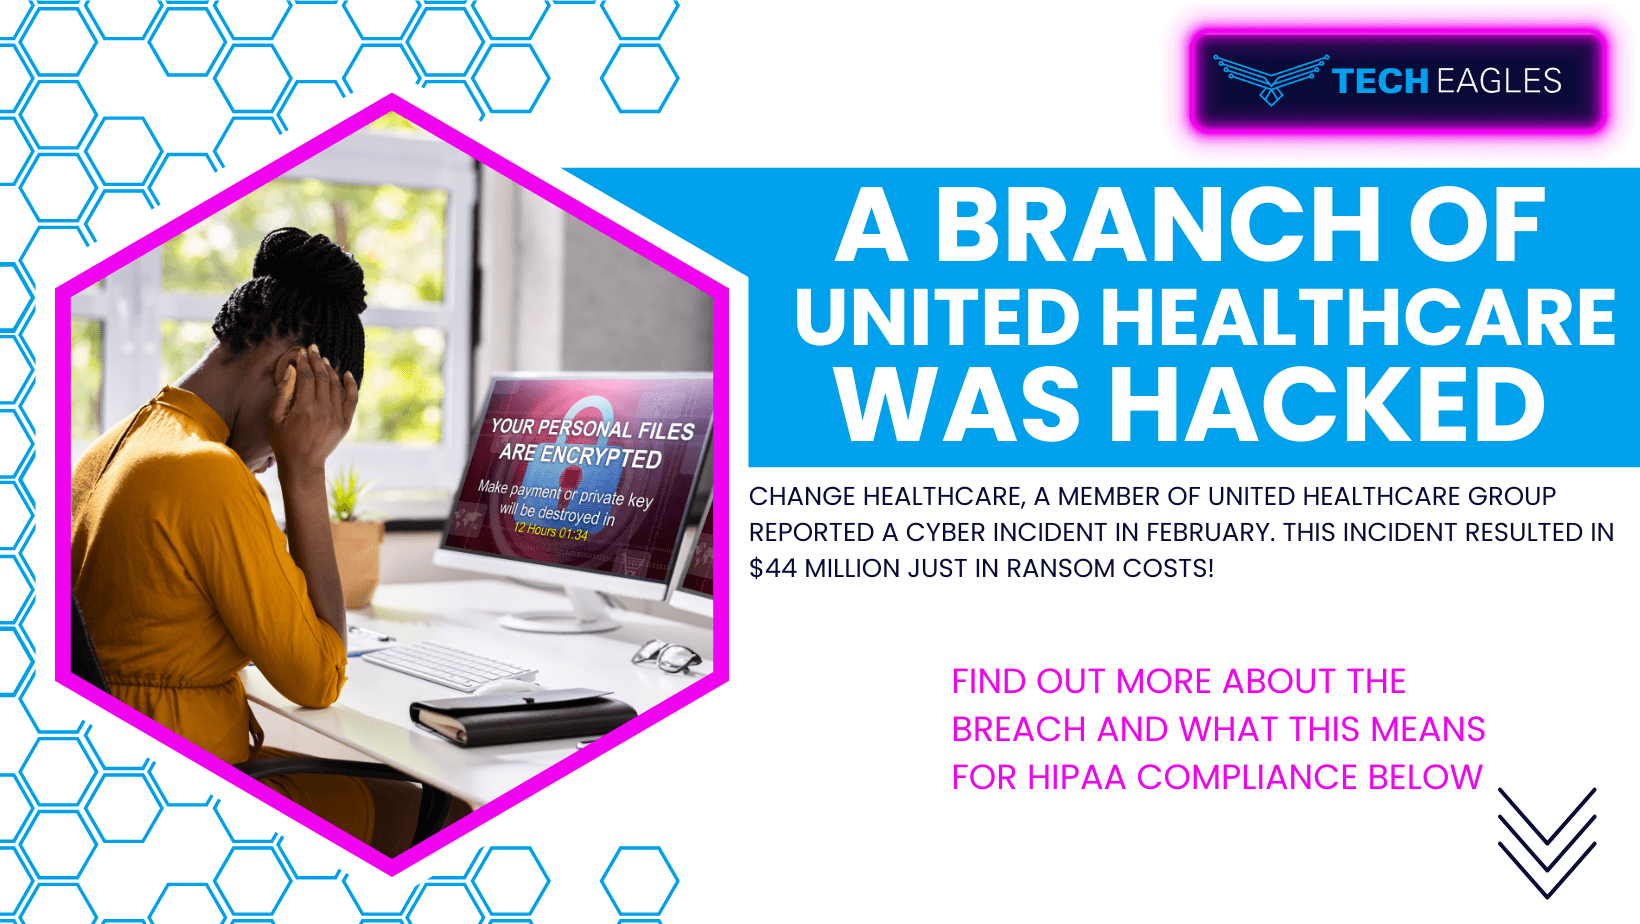 Change Healthcare Cyber Event – Holy Cow! What Happened?